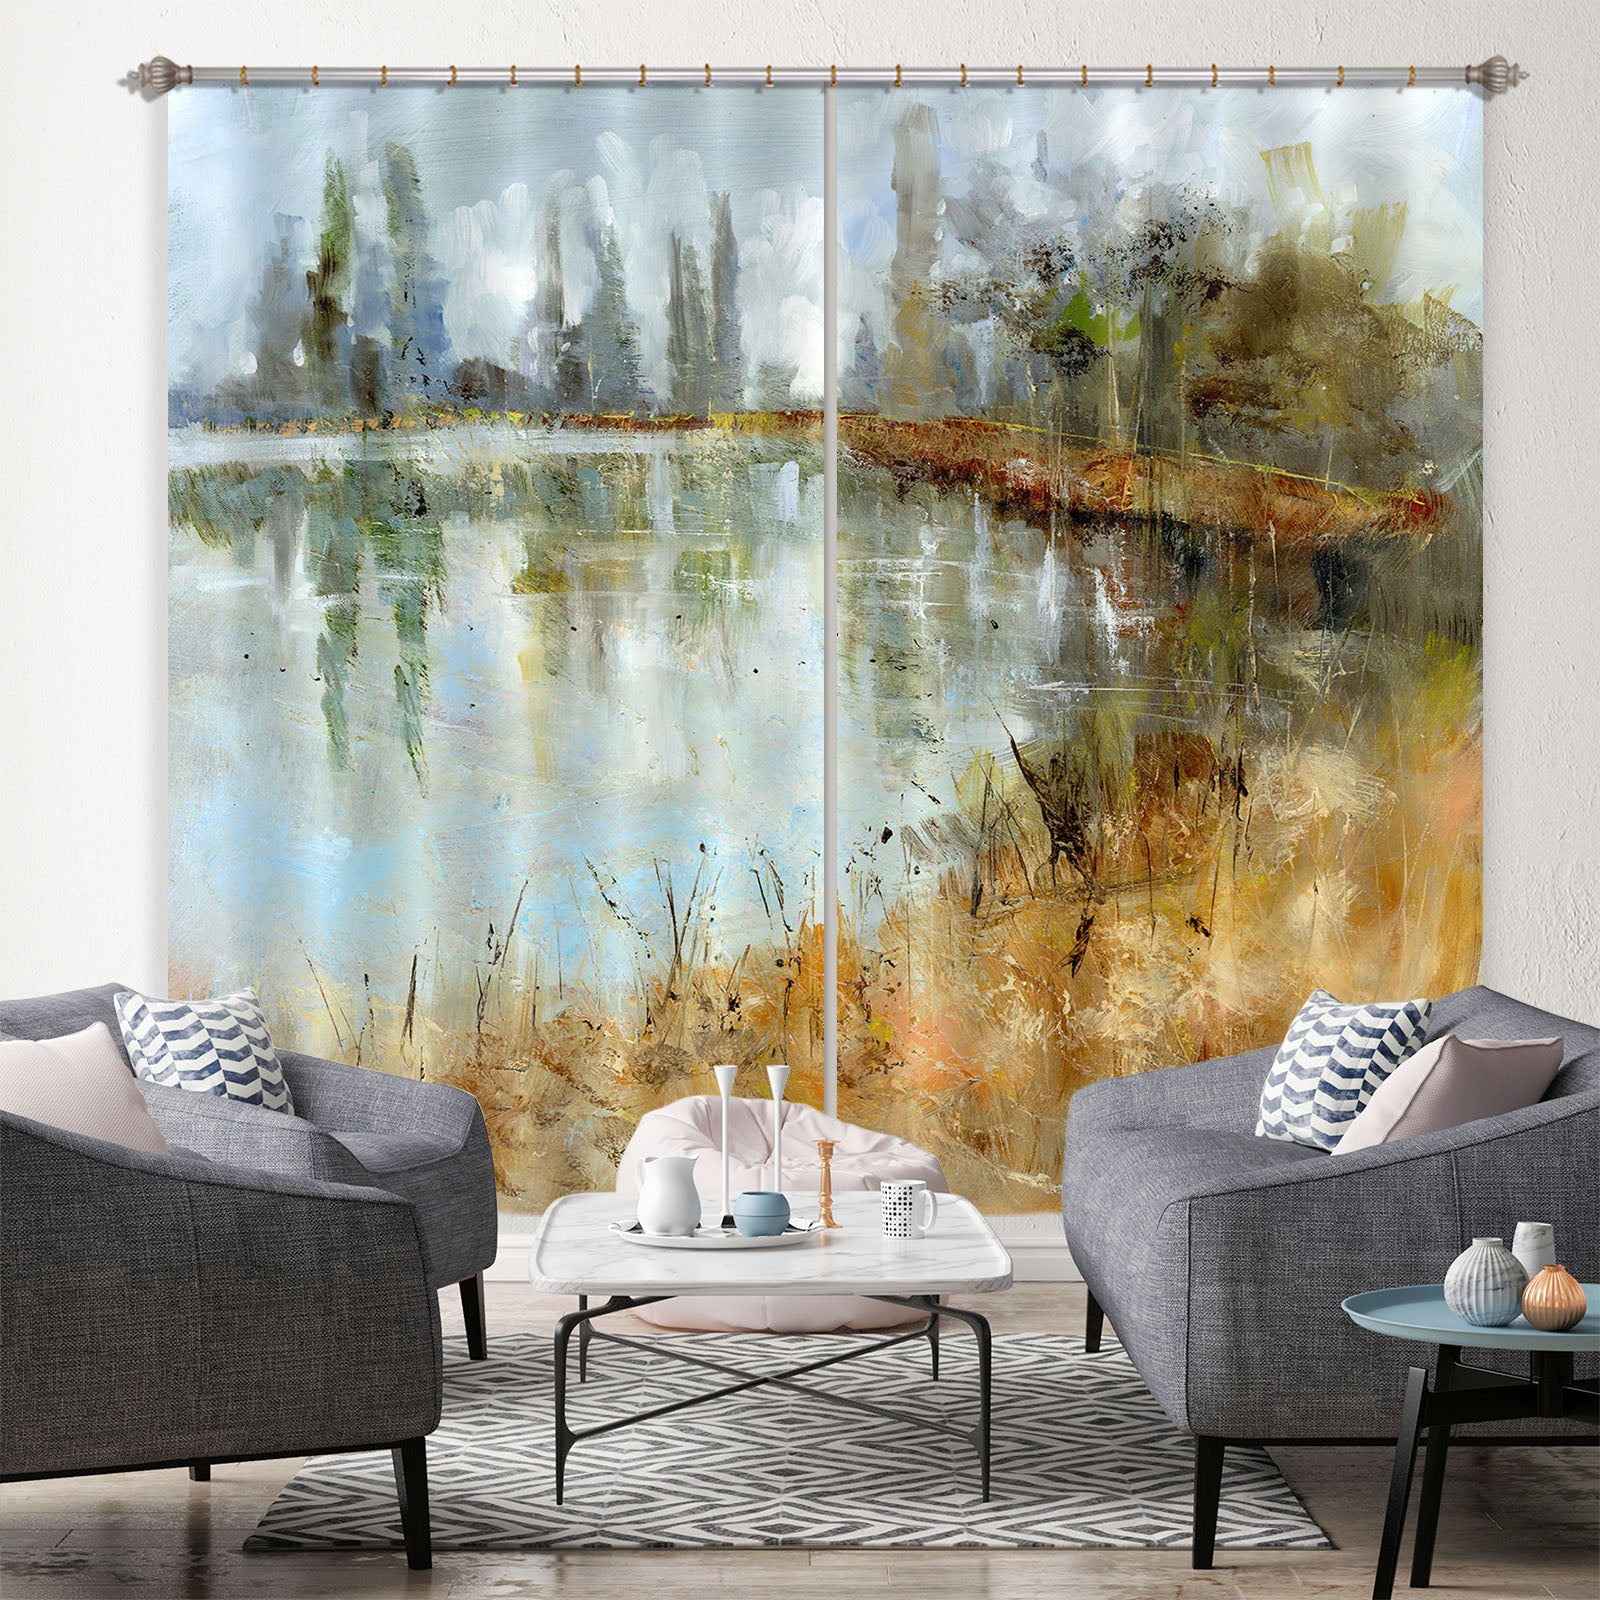 3D Country Road 012 Anne Farrall Doyle Curtain Curtains Drapes